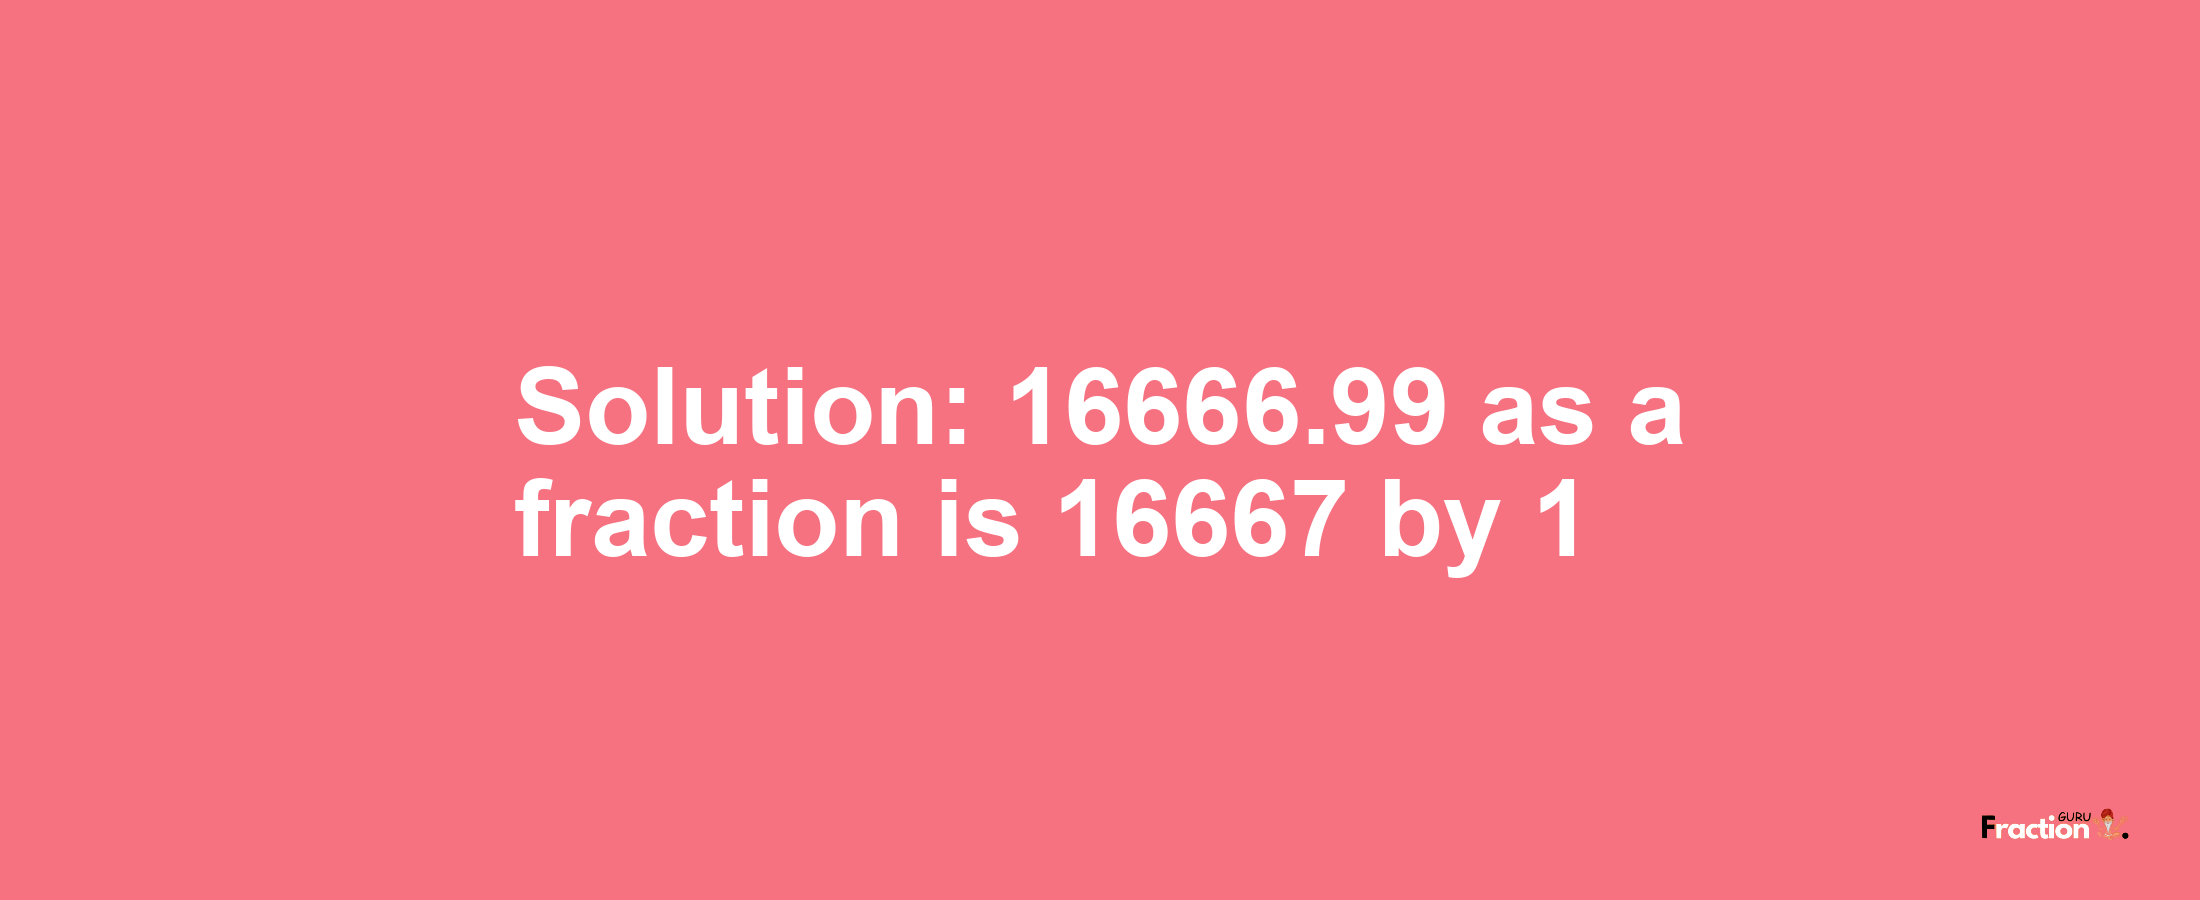 Solution:16666.99 as a fraction is 16667/1